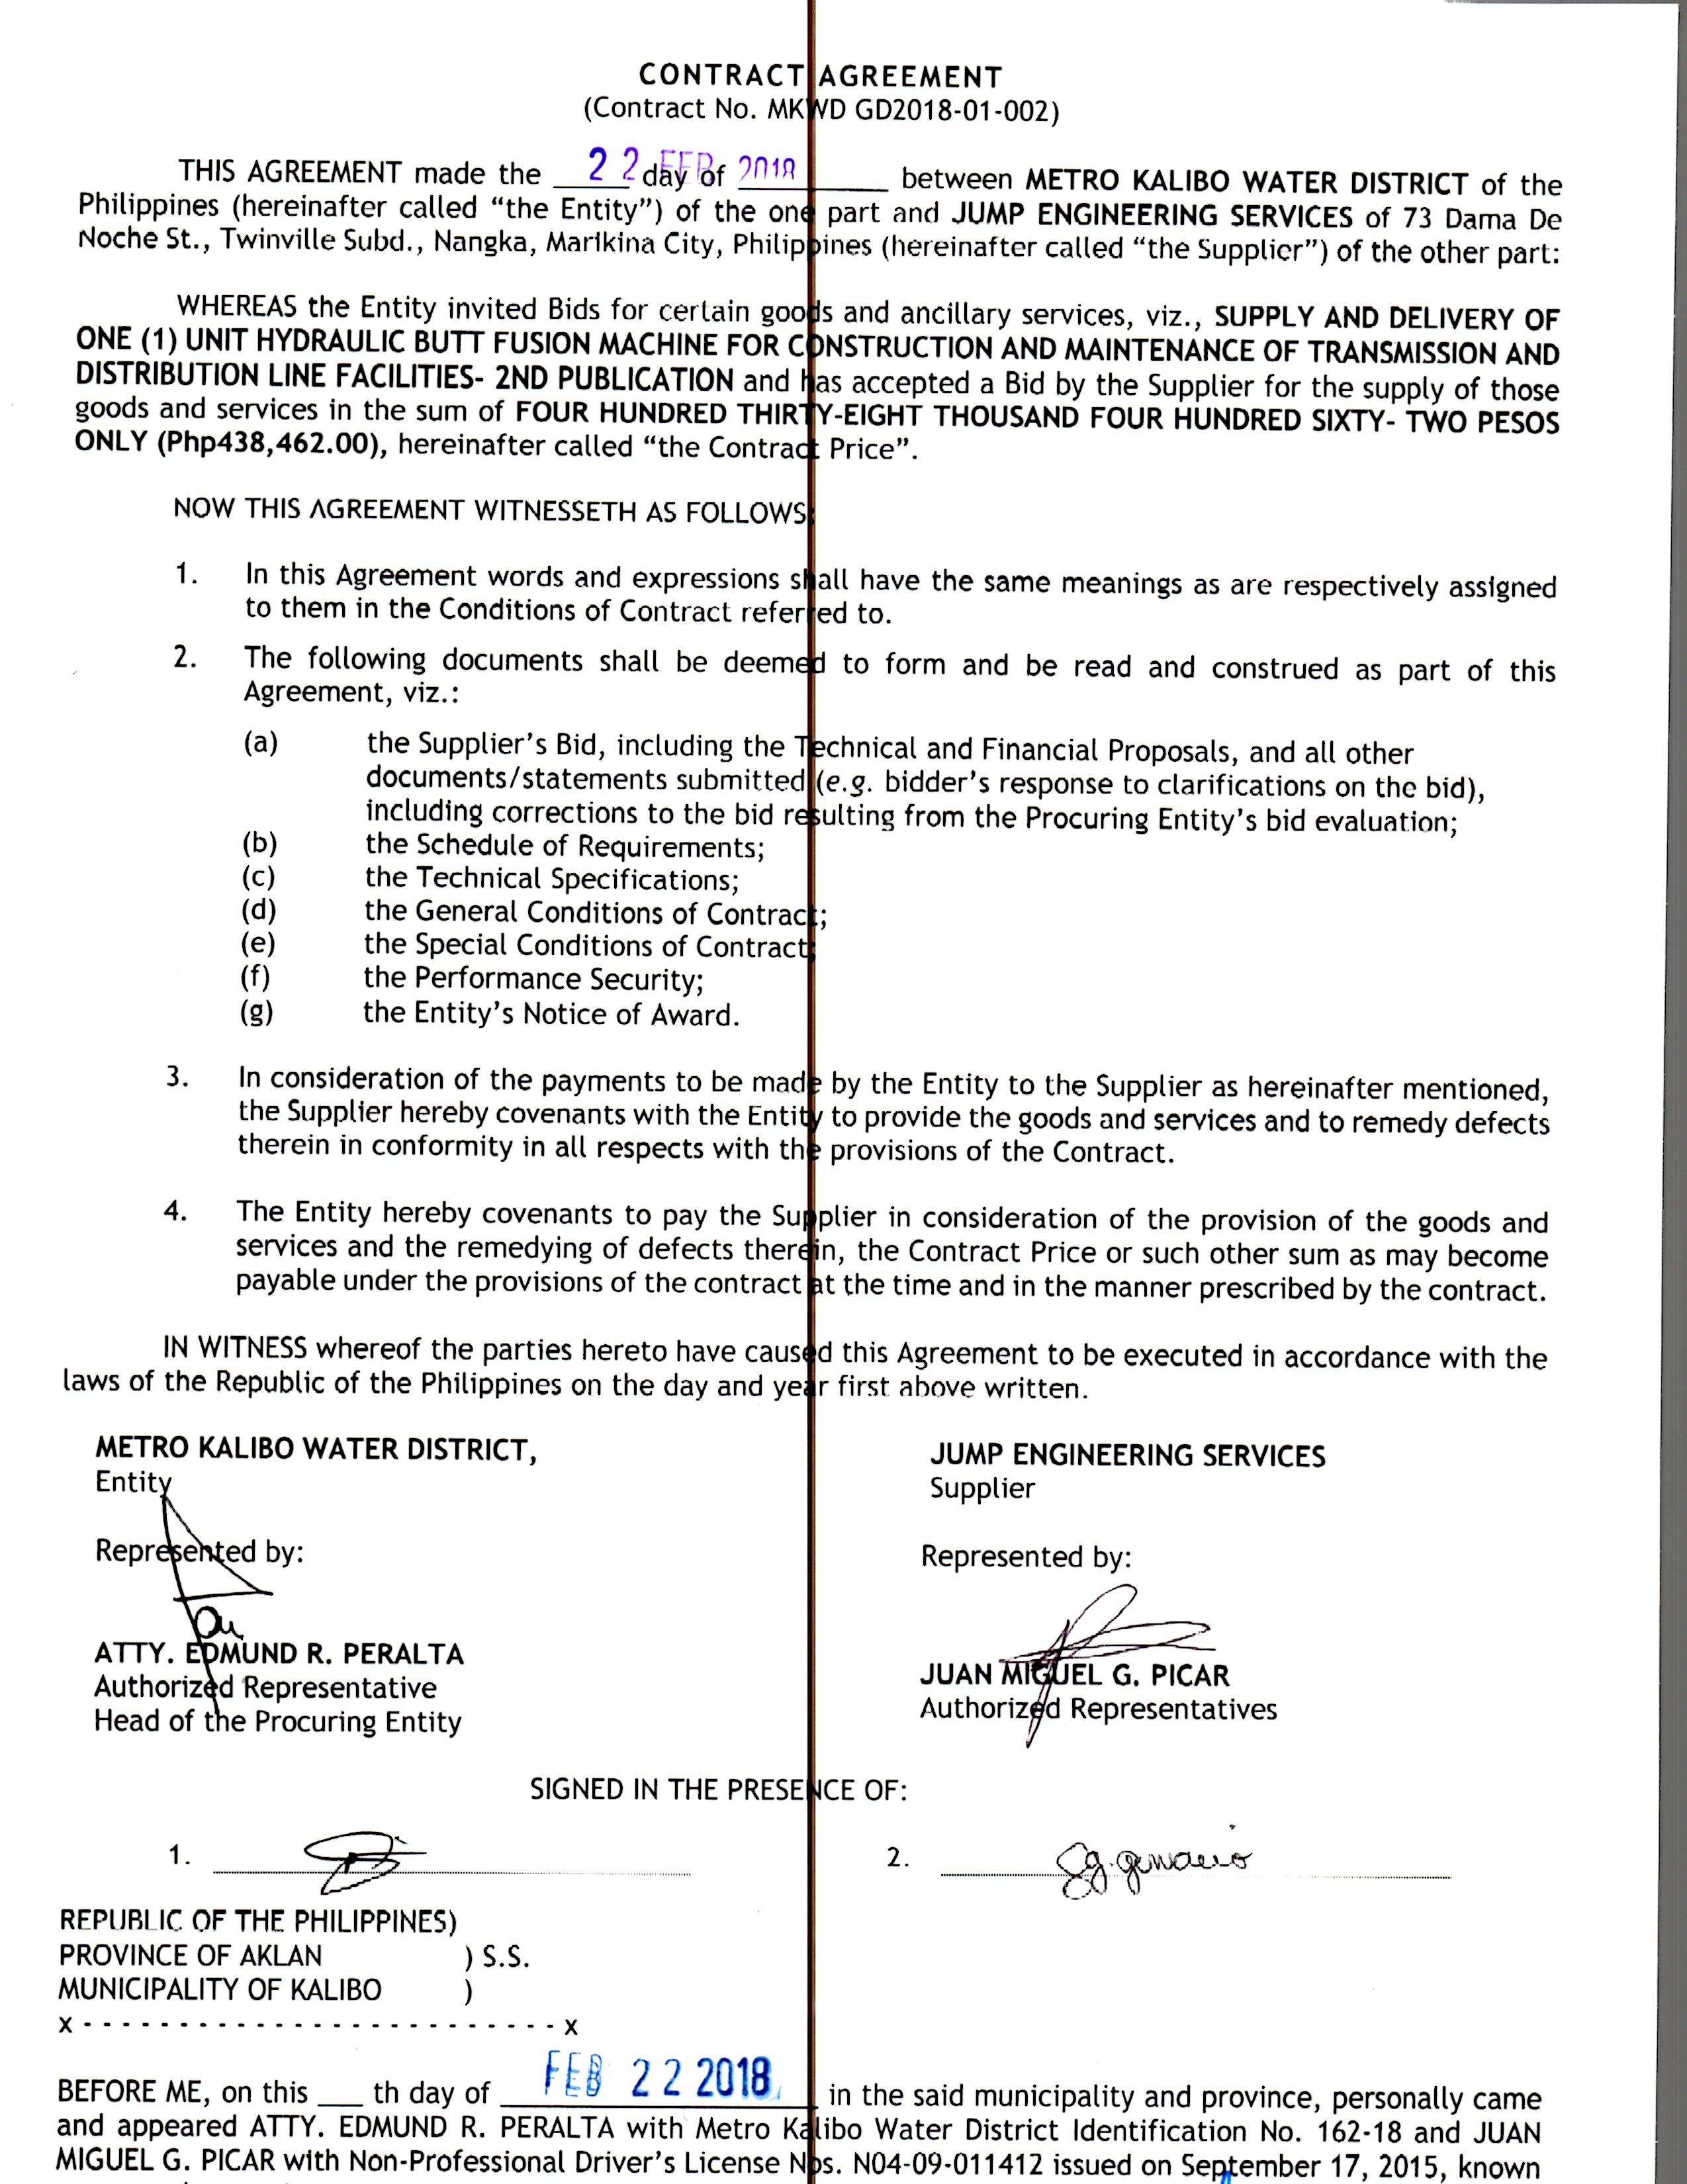 Bulk Water Supply Agreement Invitations And Notices Metro Kalibo Water District